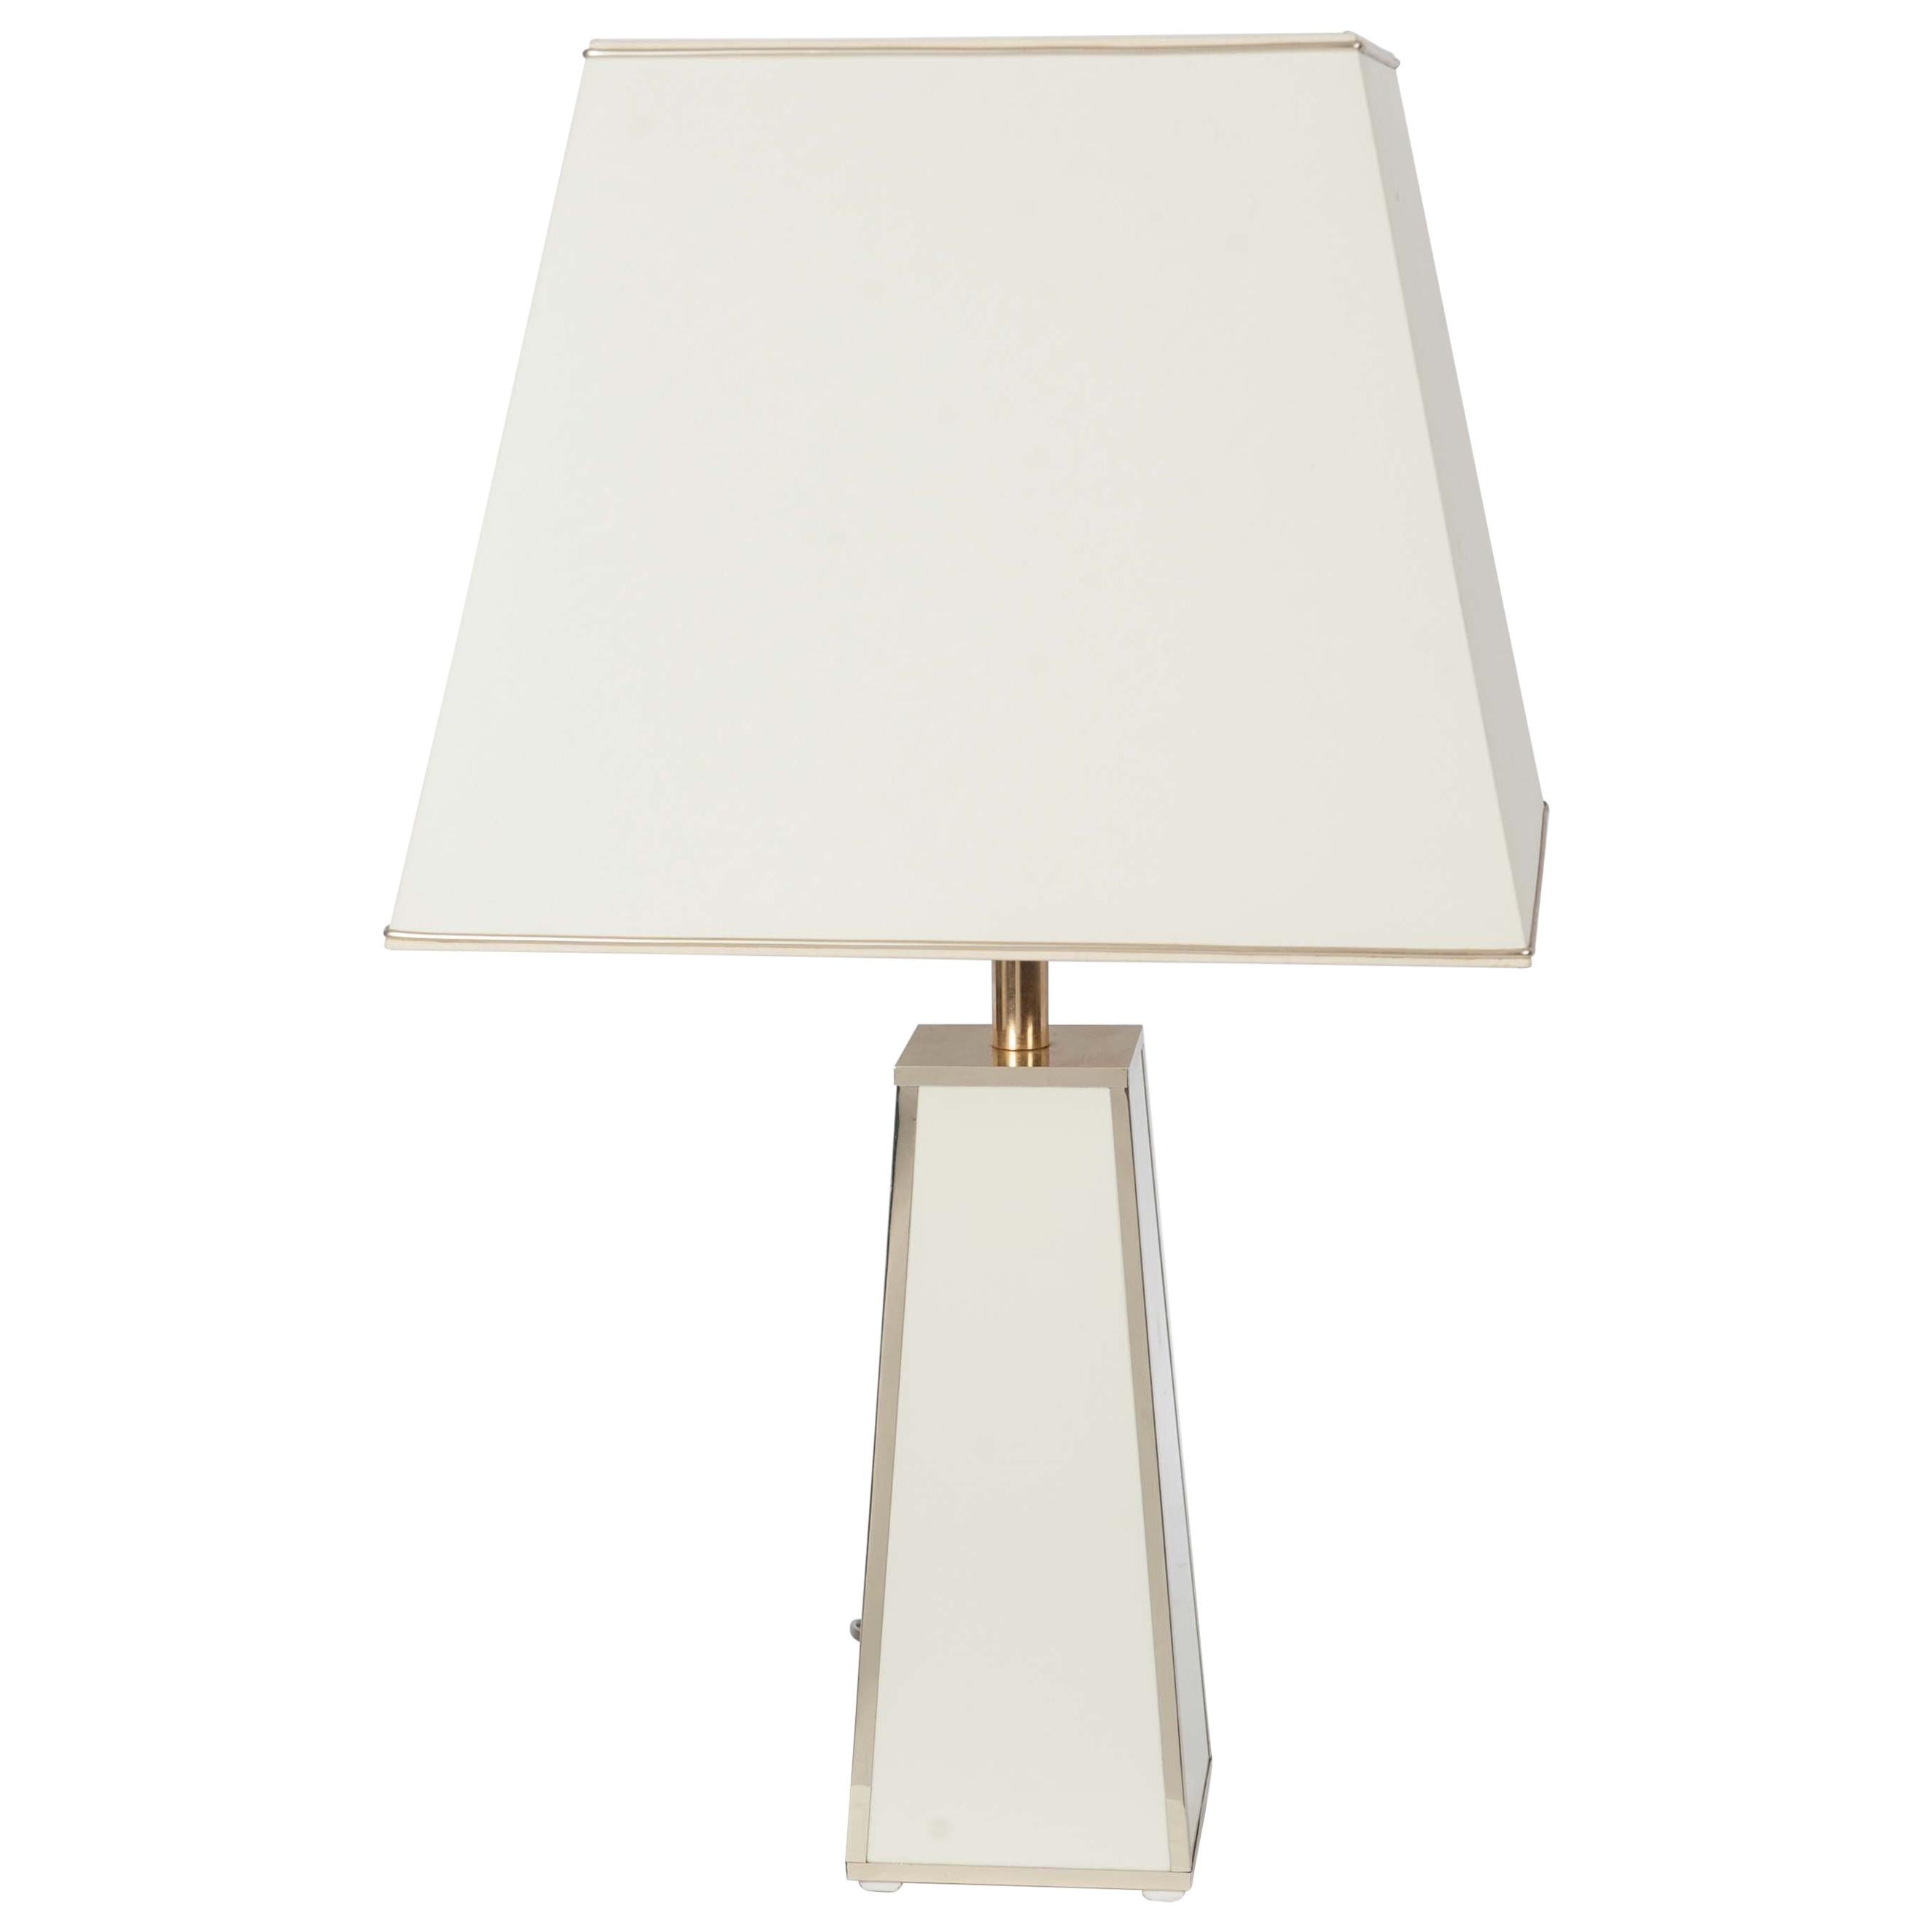 Creme Colored Hollywood Regency Table Lamp with Gold Colored Details